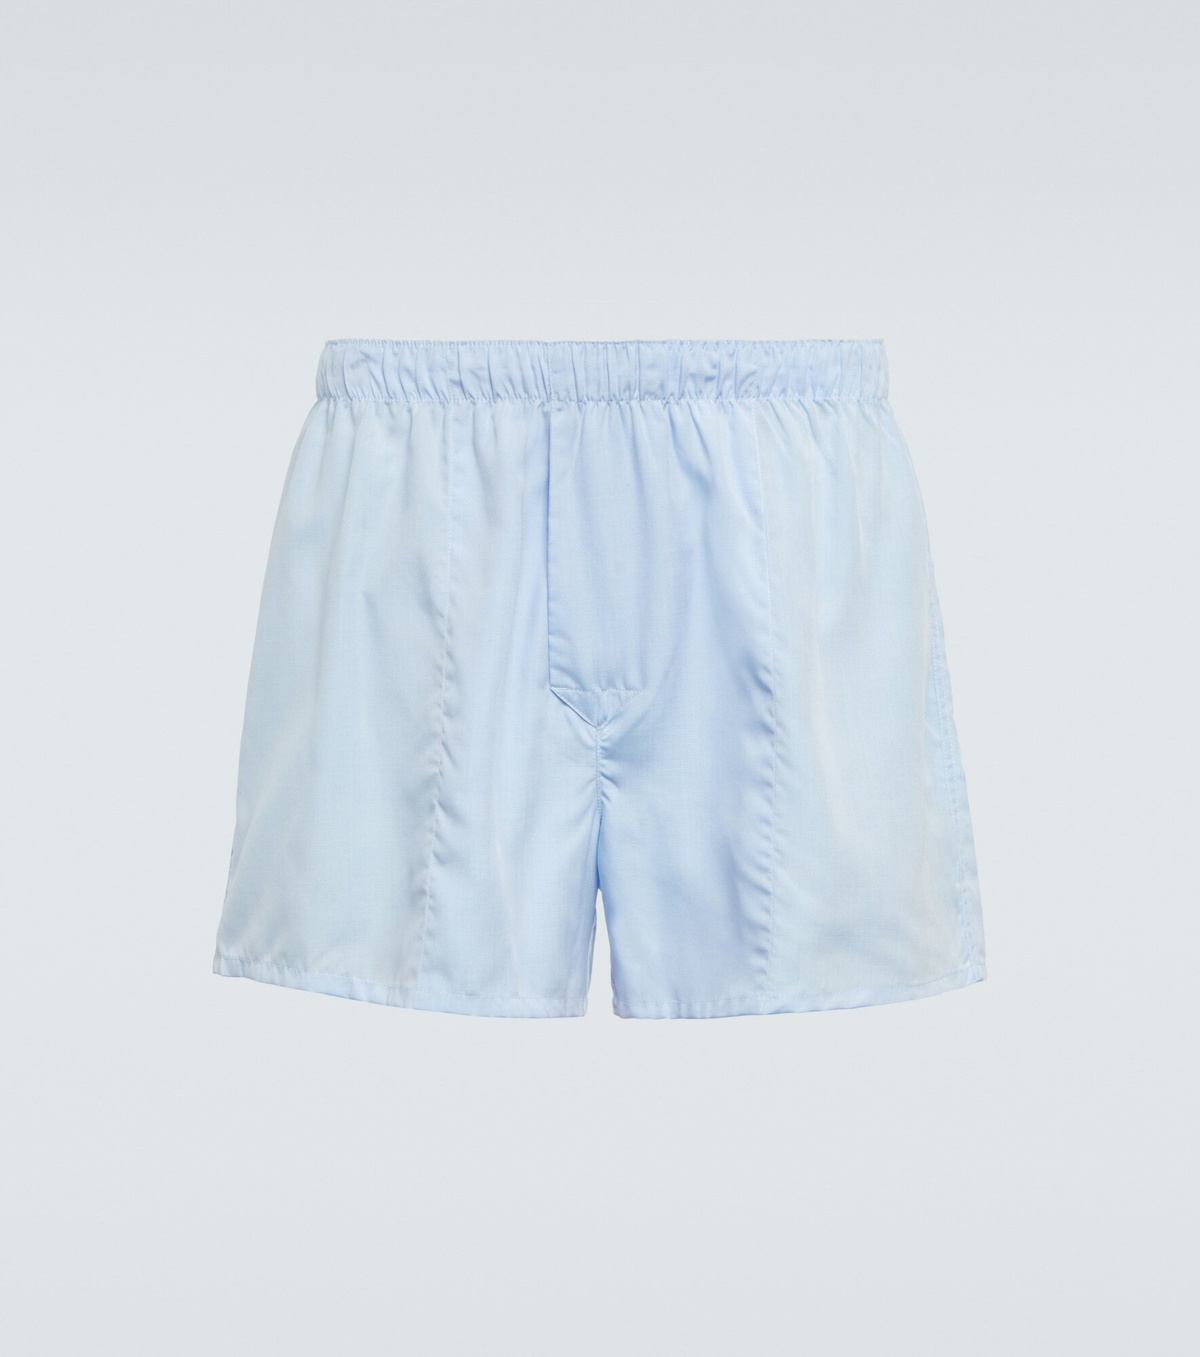 CDLP - Pleated boxers